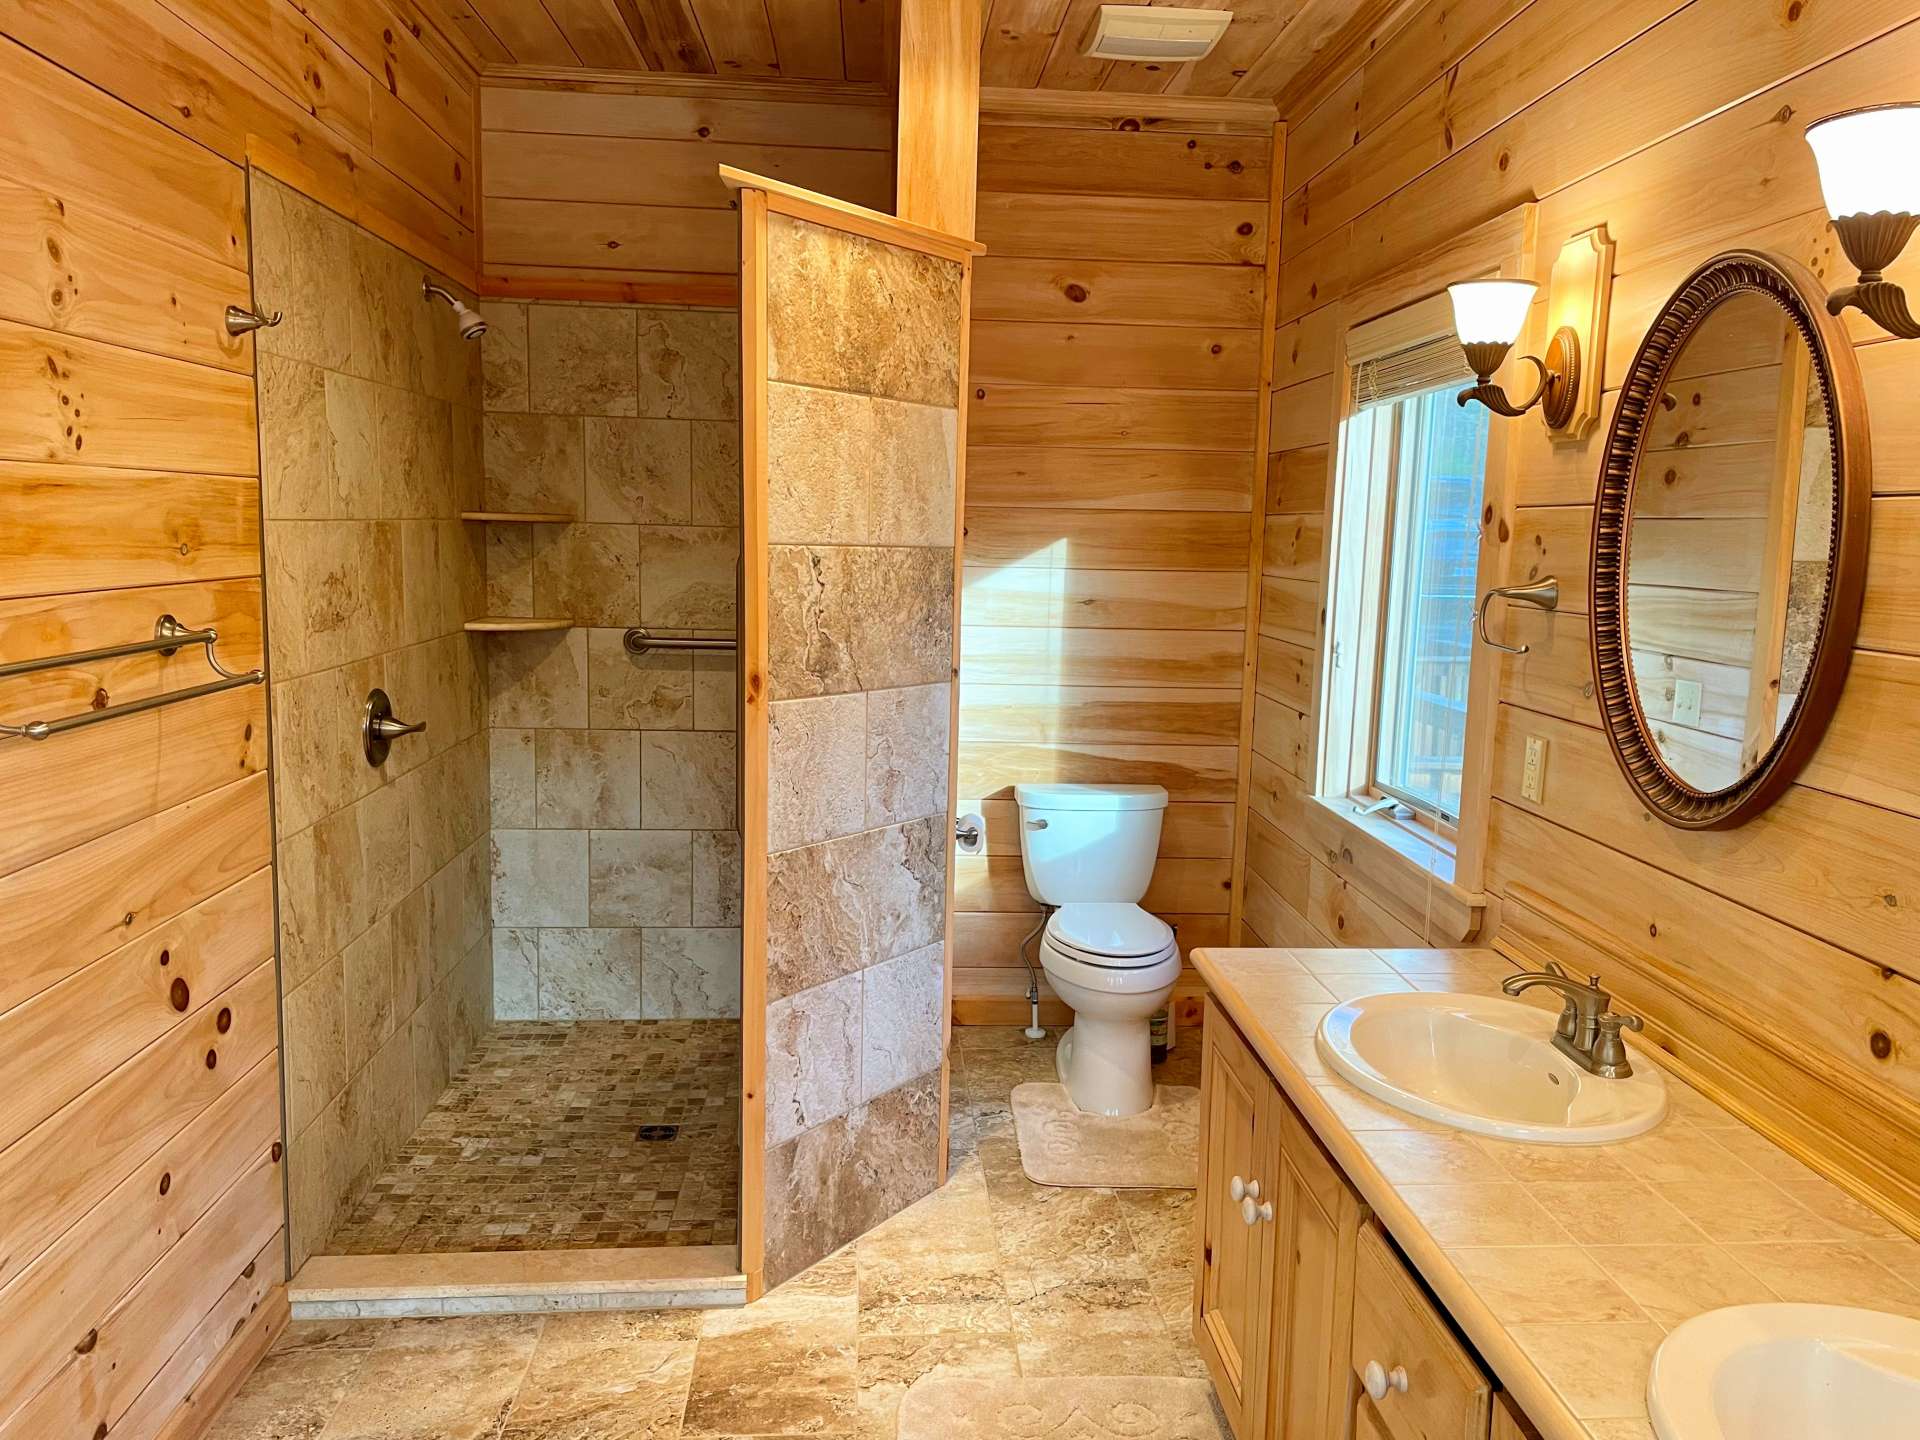 Recently remodeled primary bath with heated floors and walkout shower.